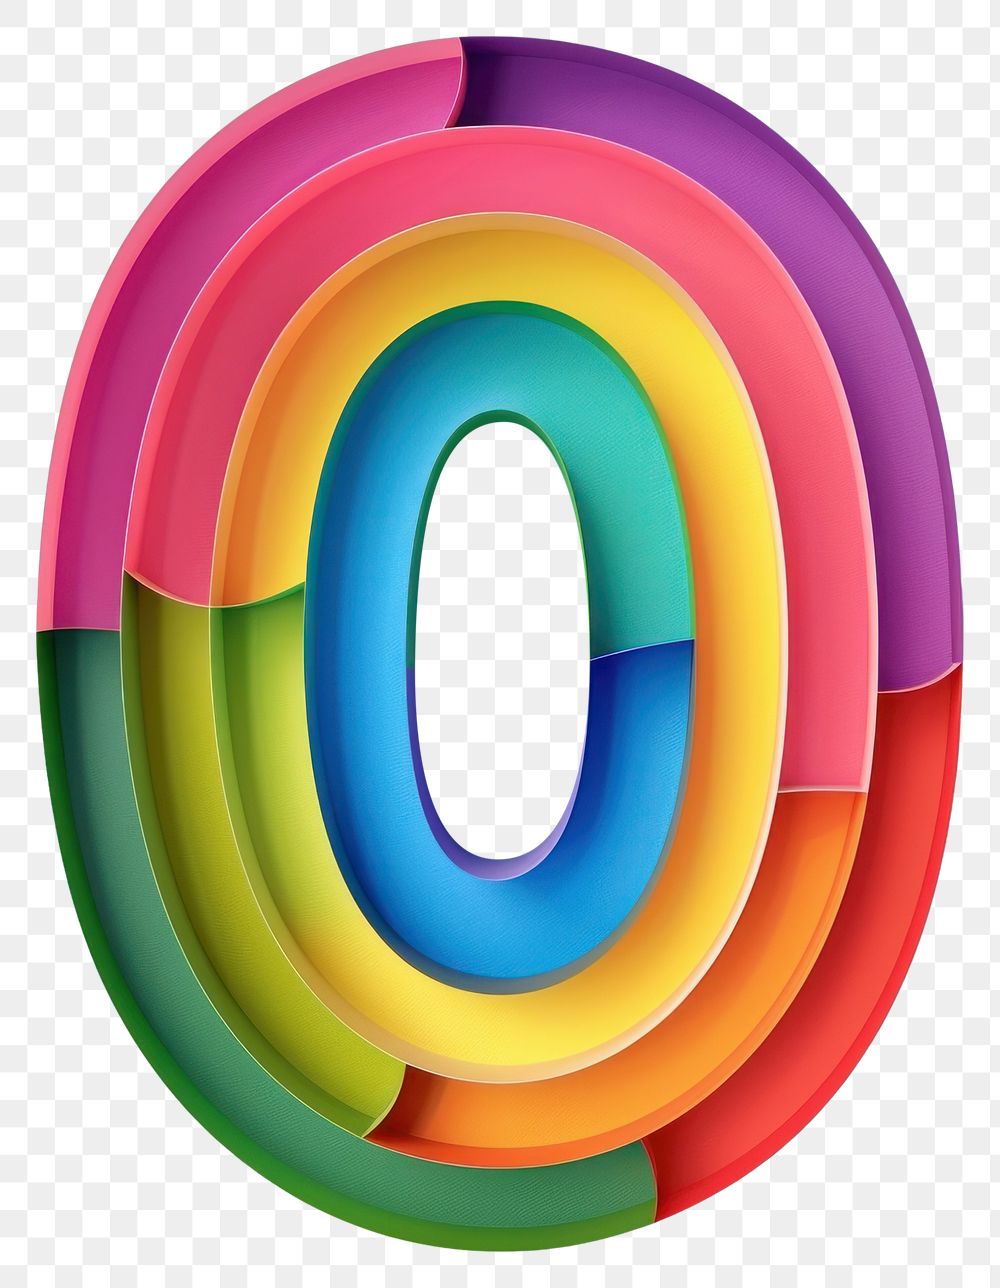 PNG Rainbow with number 0 art logo disk.